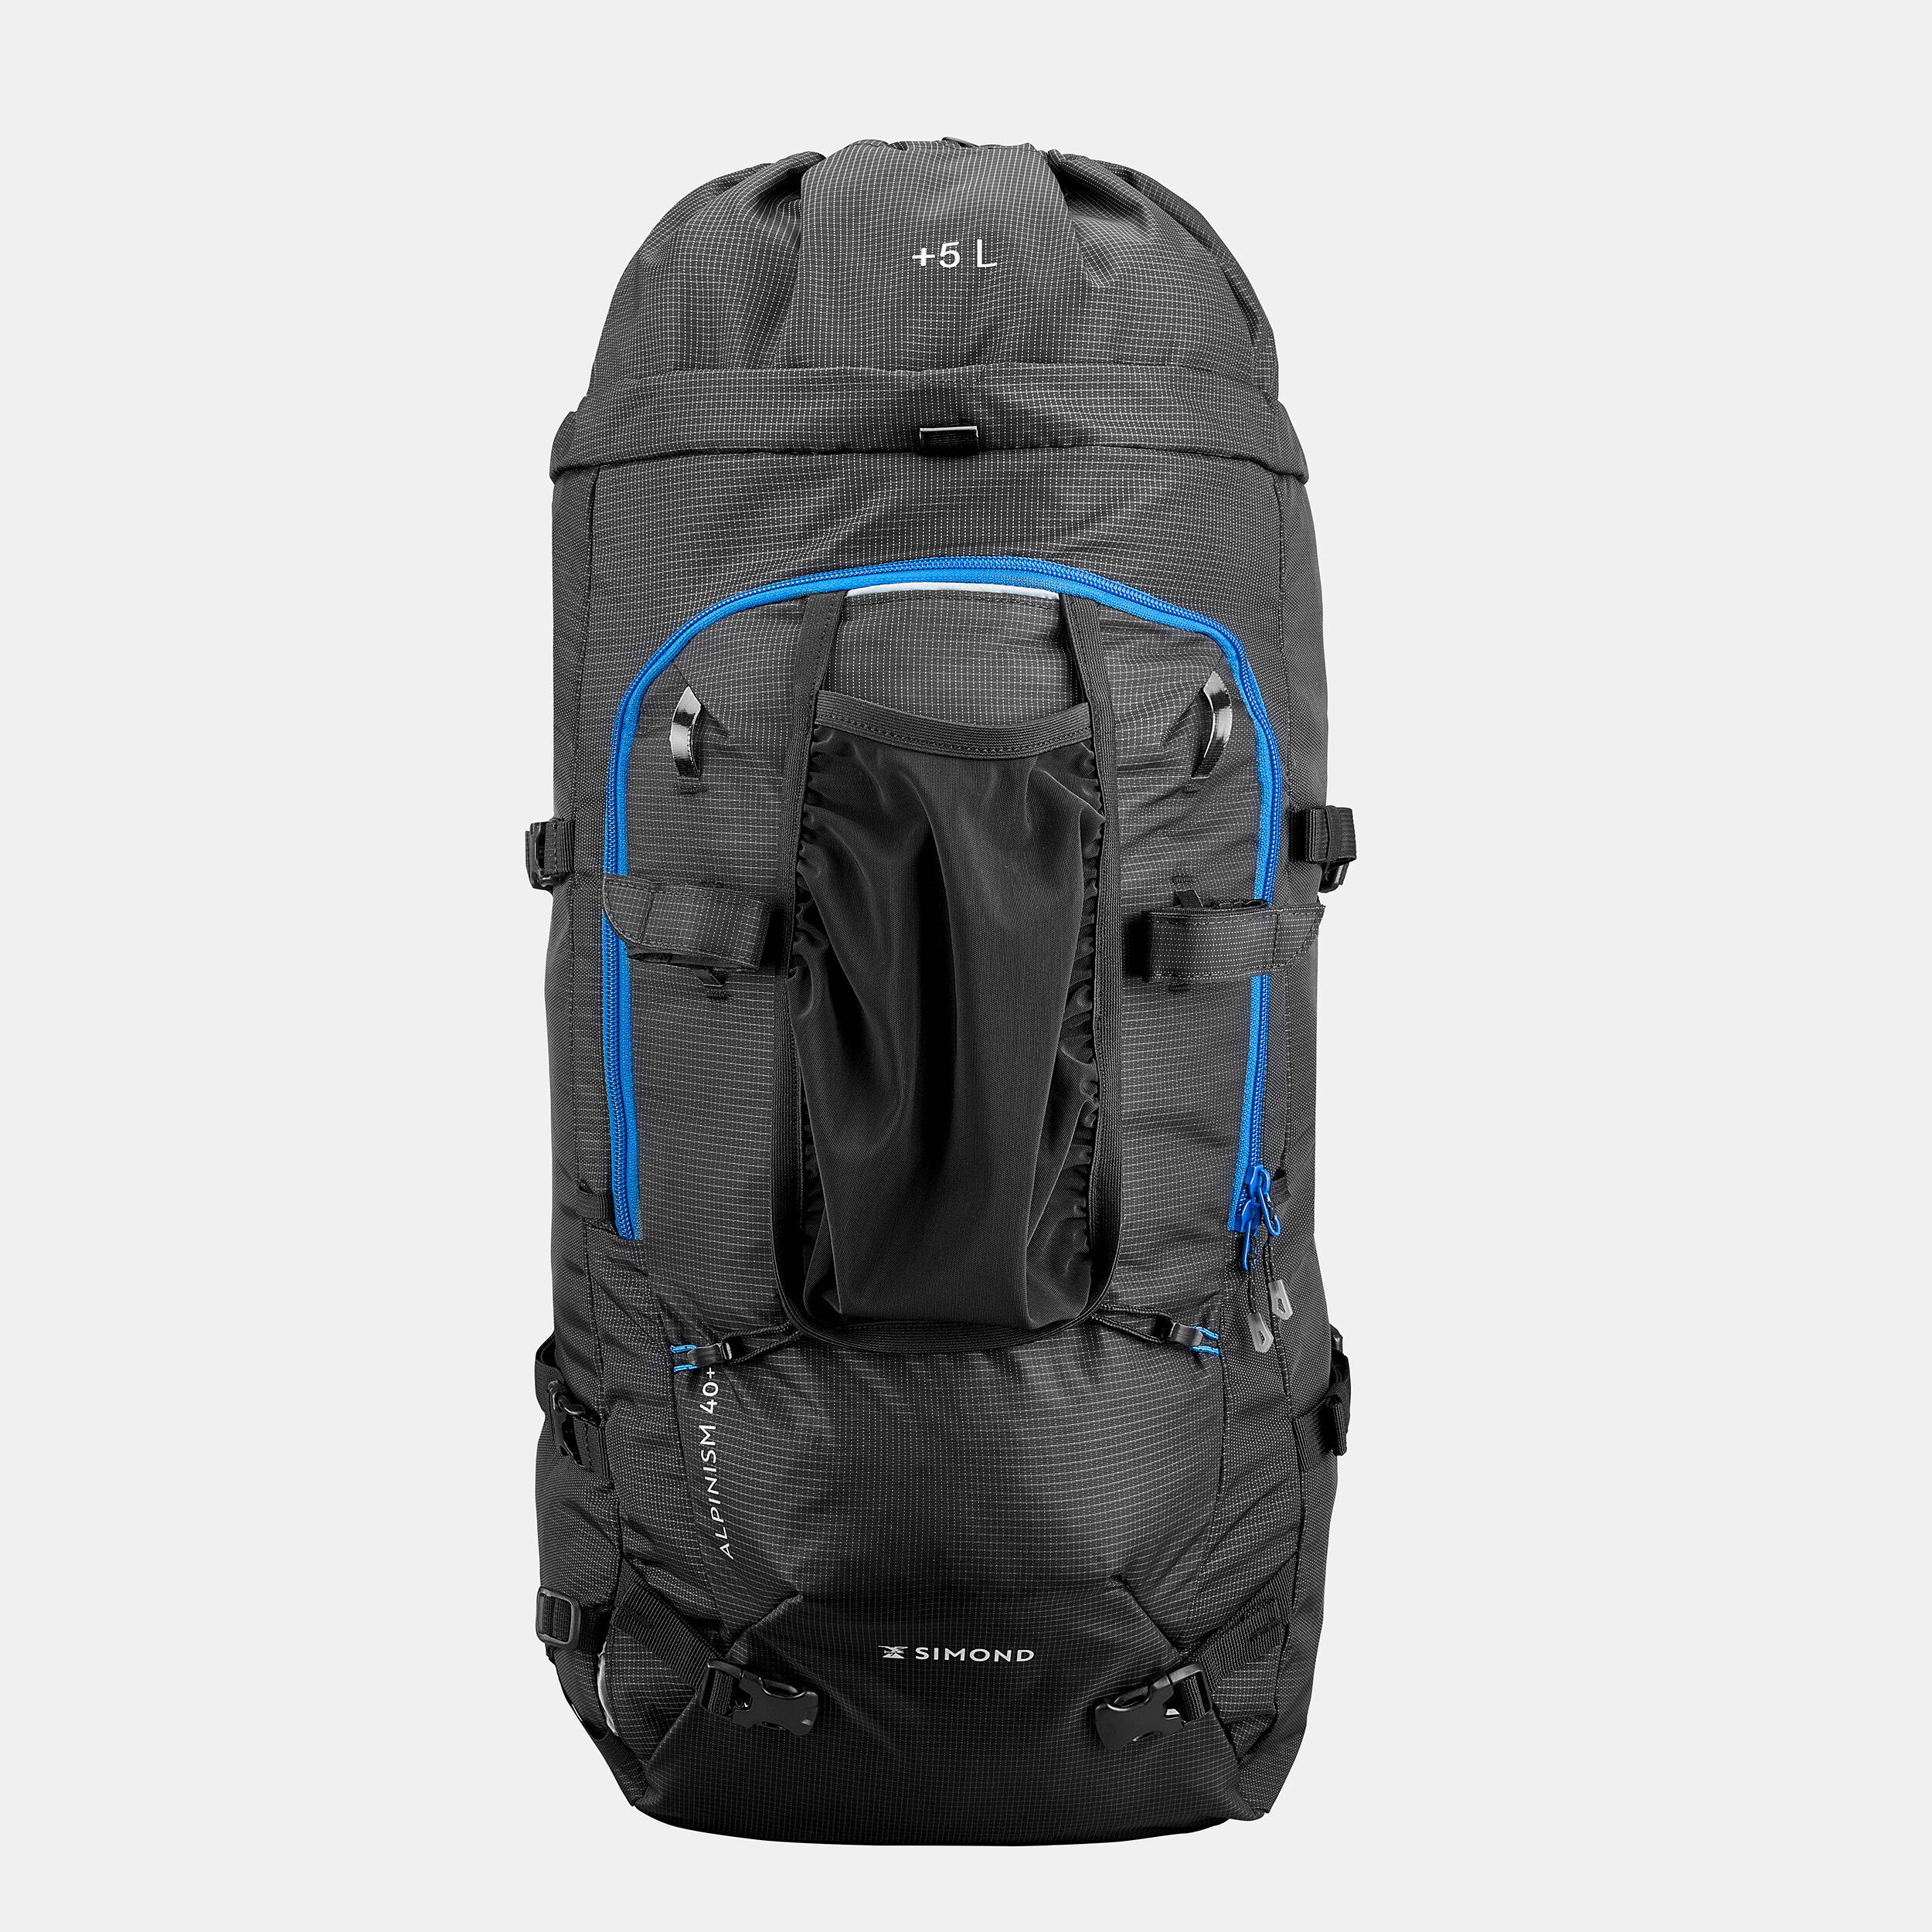 MOUNTAINEERING BACKPACK 40 LITRES - ALPINISM 40 EVO BLACK 10/15